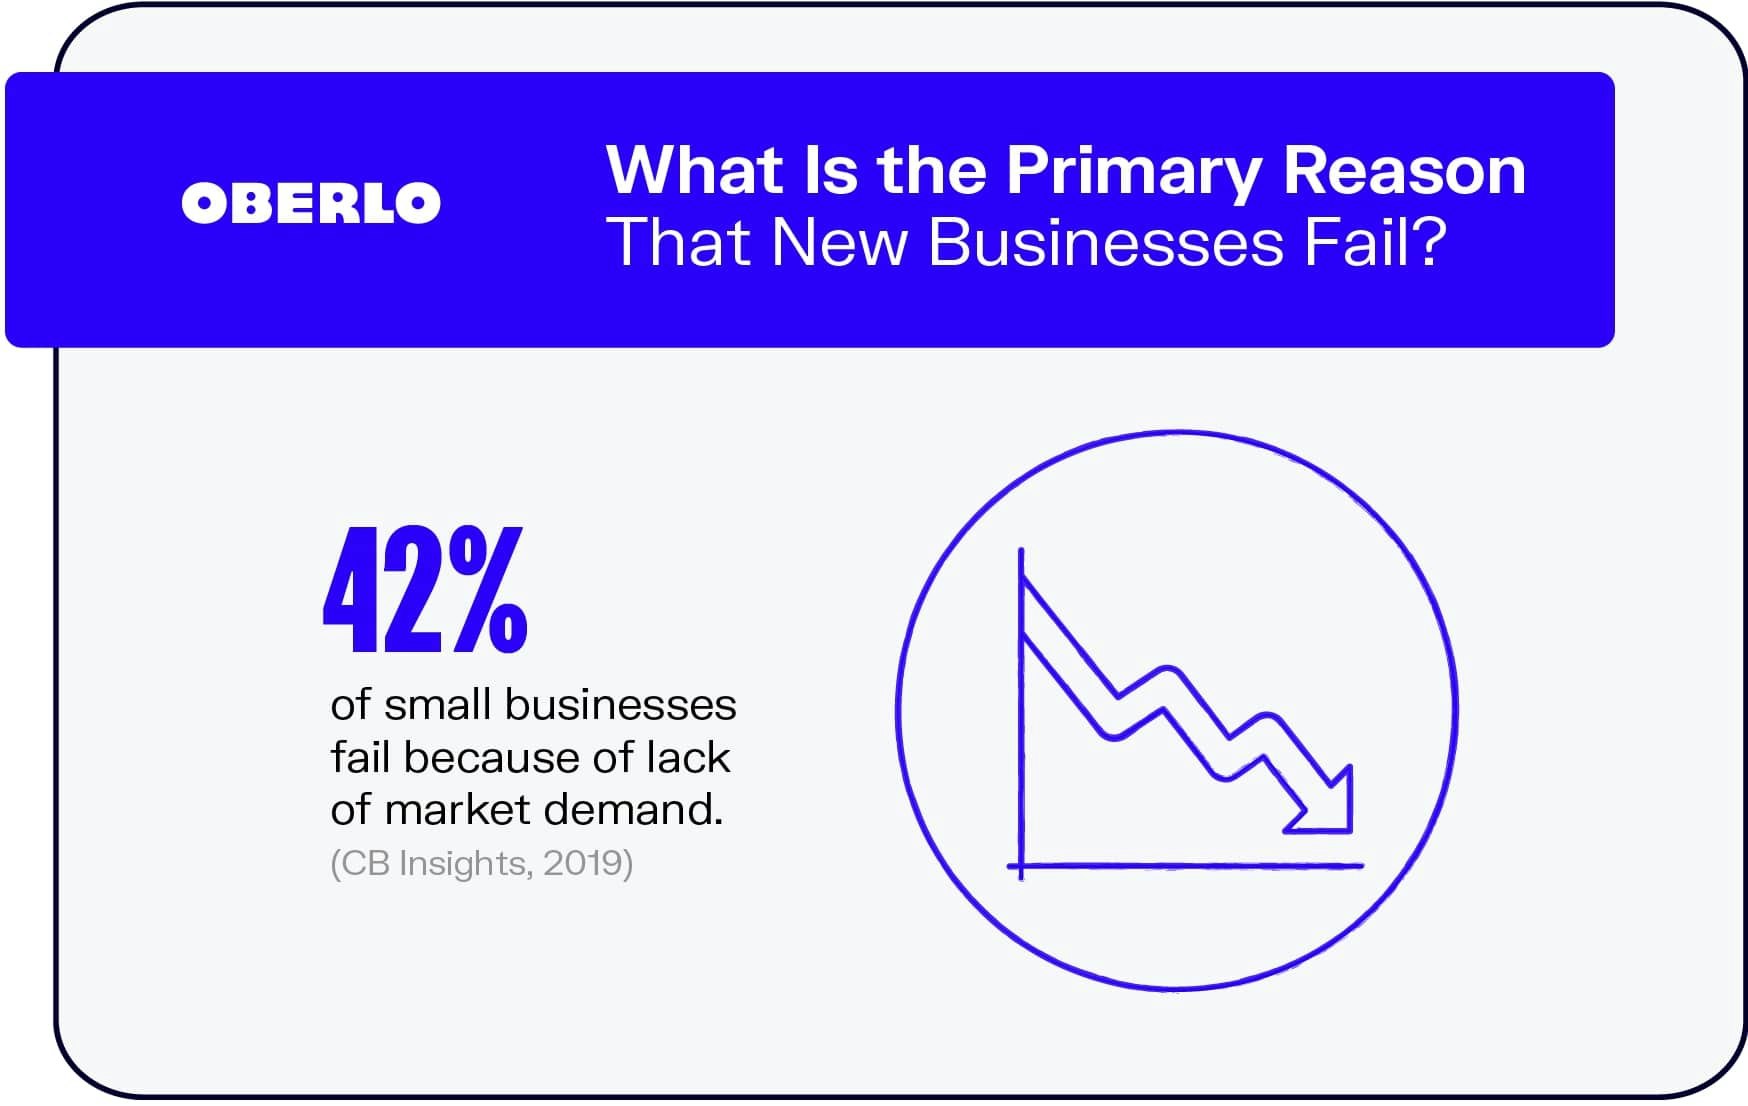 What Is the Primary Reason That New Businesses Fail?